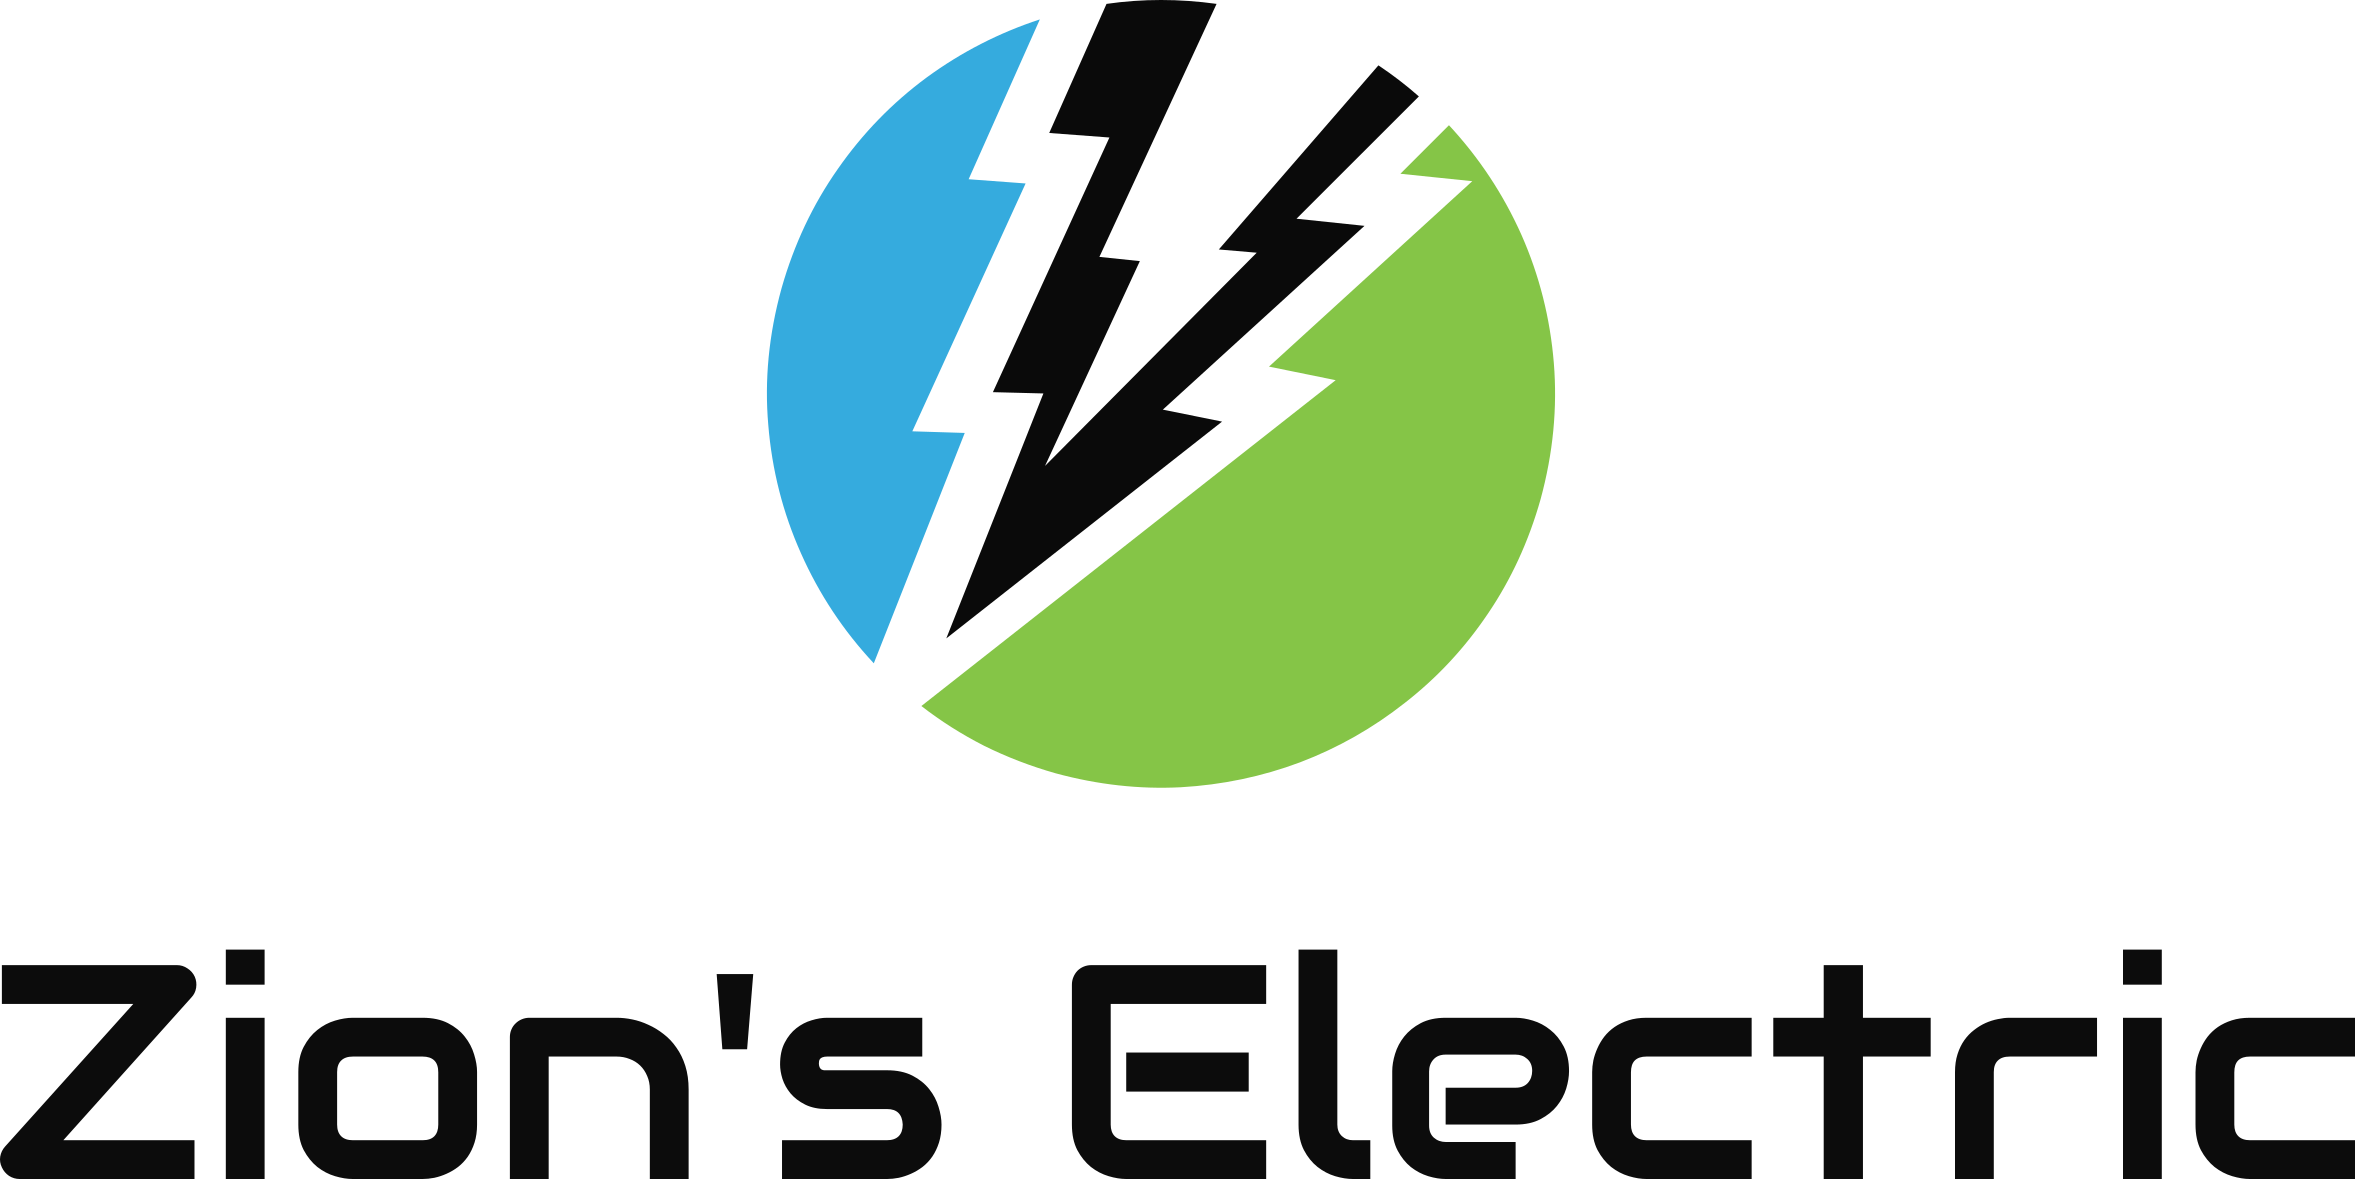 Zion's Electric